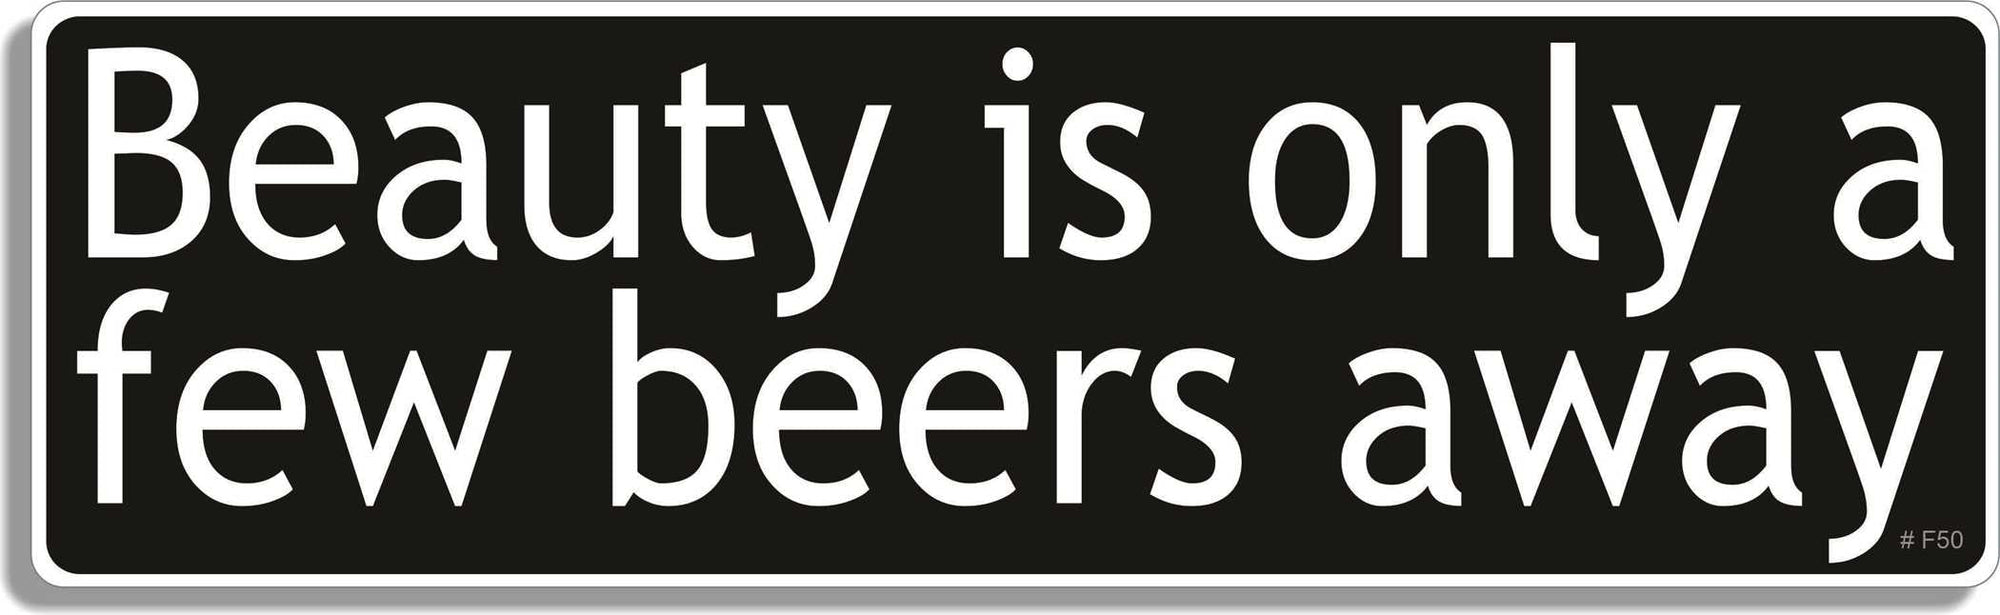 Beauty is only a few beers away - 3" x 10" Bumper Sticker--Car Magnet- -  Decal Bumper Sticker-funny Bumper Sticker Car Magnet Beauty is only a few beers away-  Decal for carsAlcohol